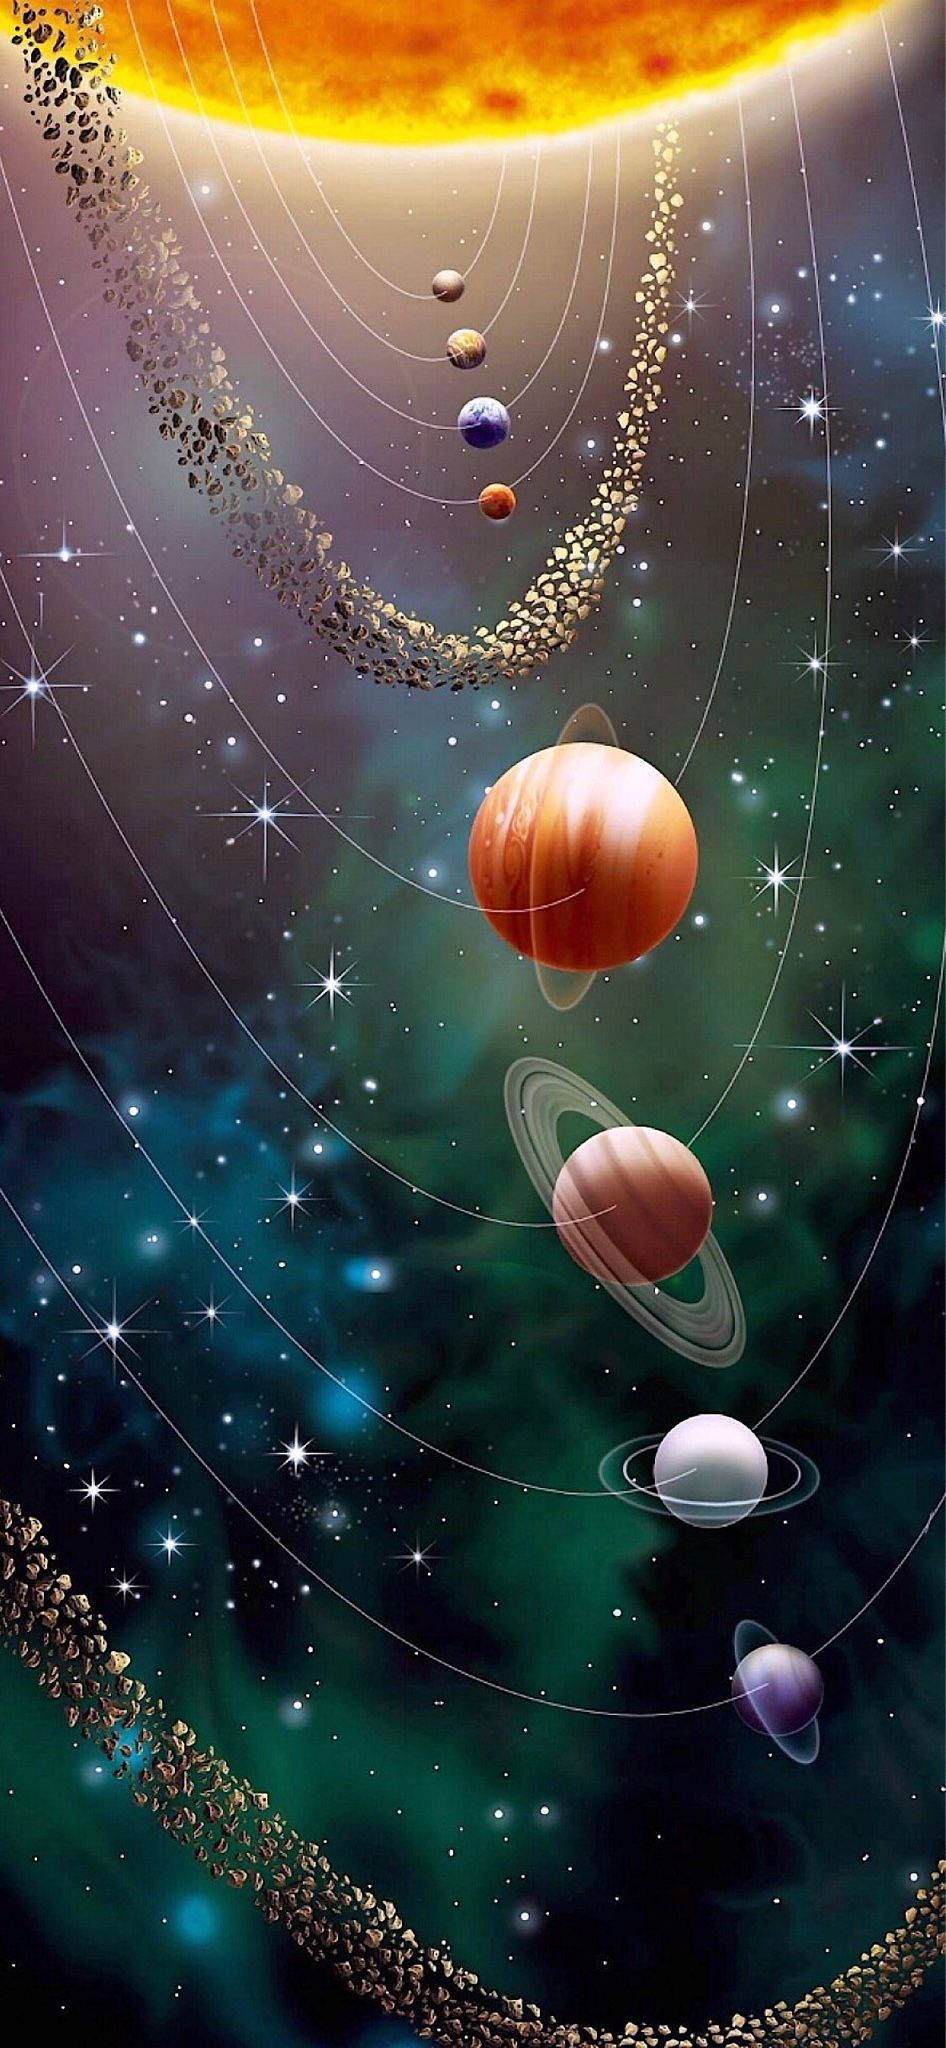 A Solar System With Many Planets In The Background Background